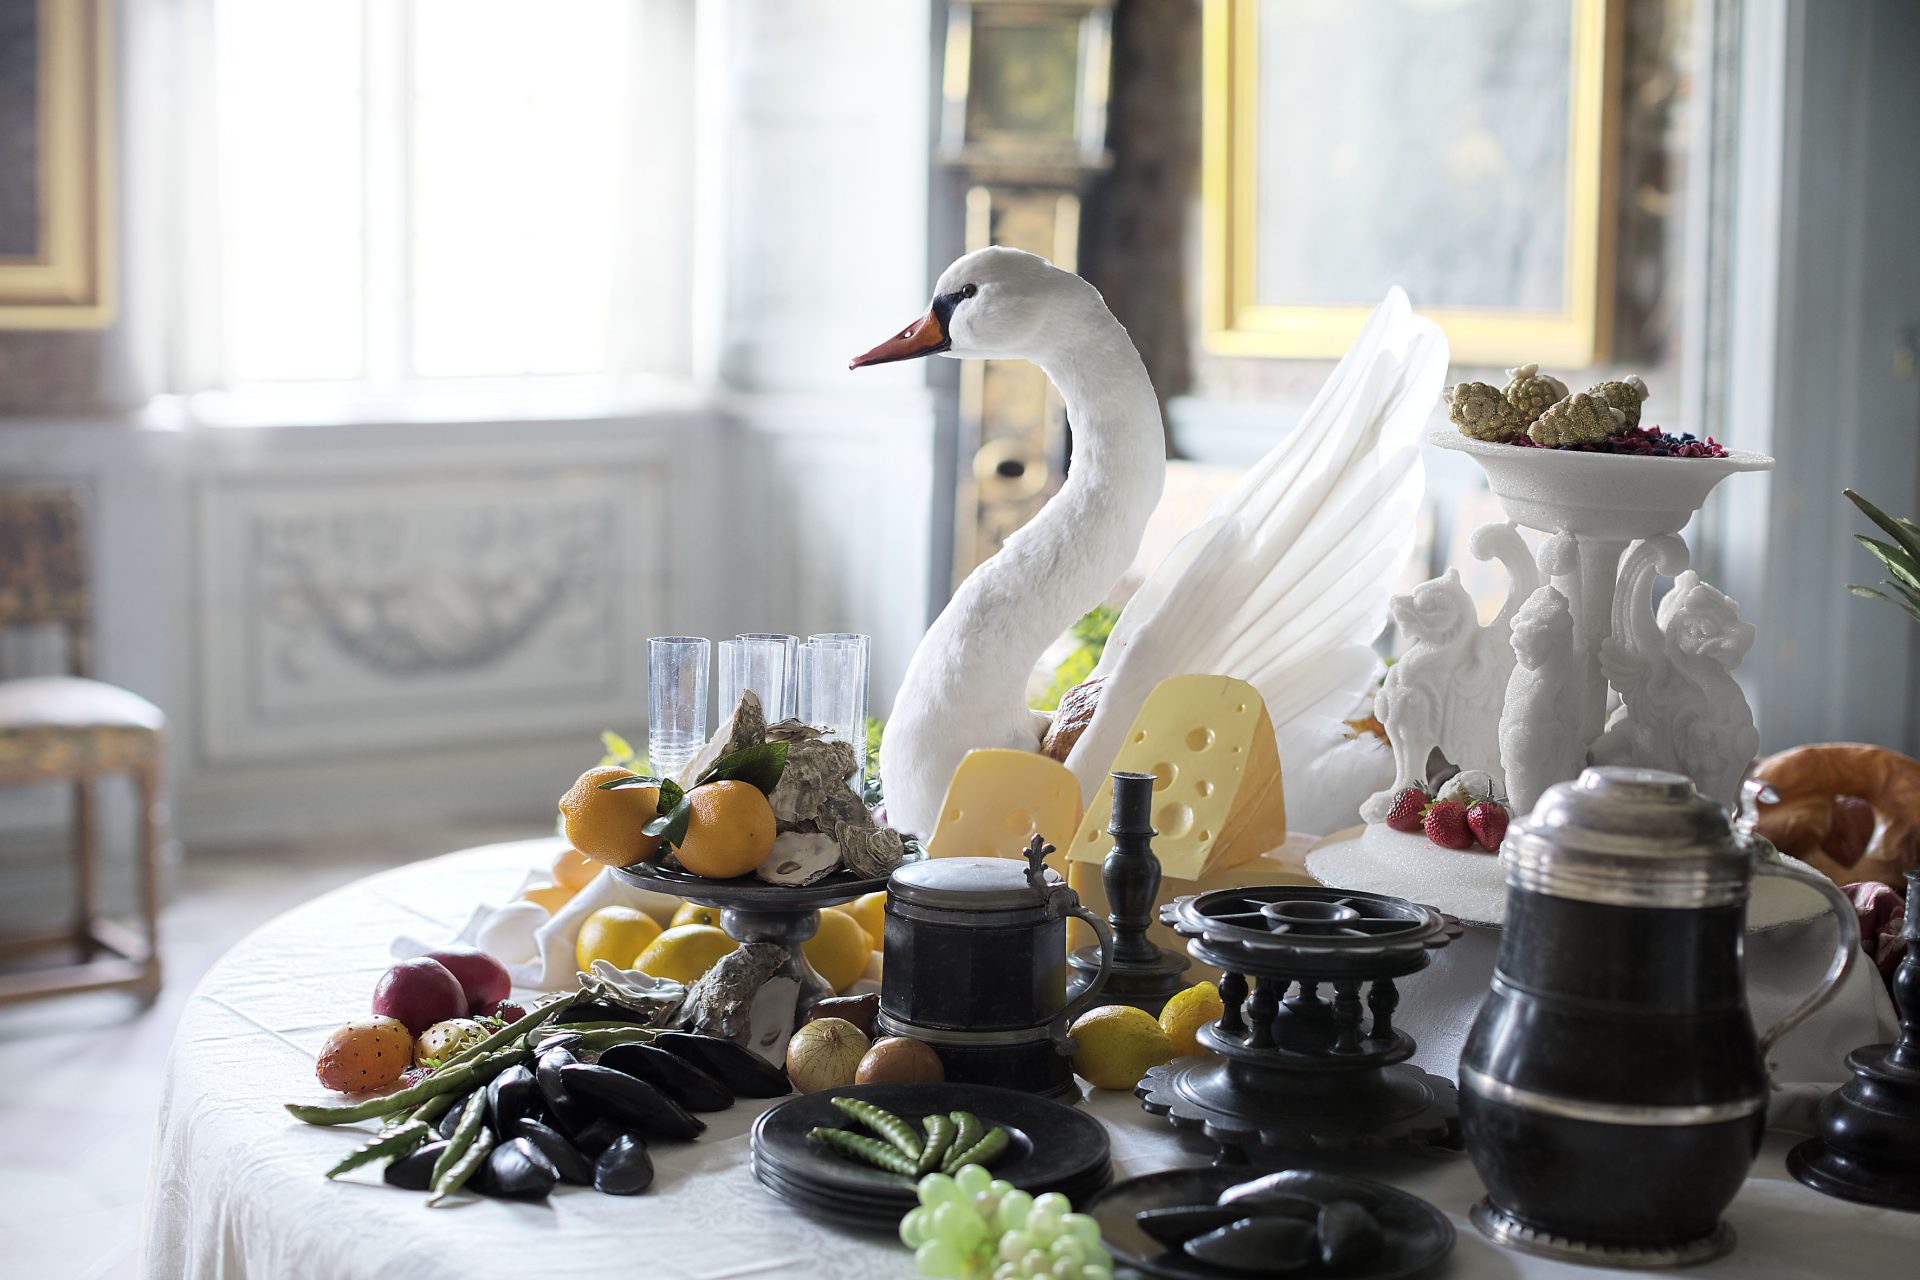  A table set with food, fruit and cheese. In the middle is a stuffed swan.